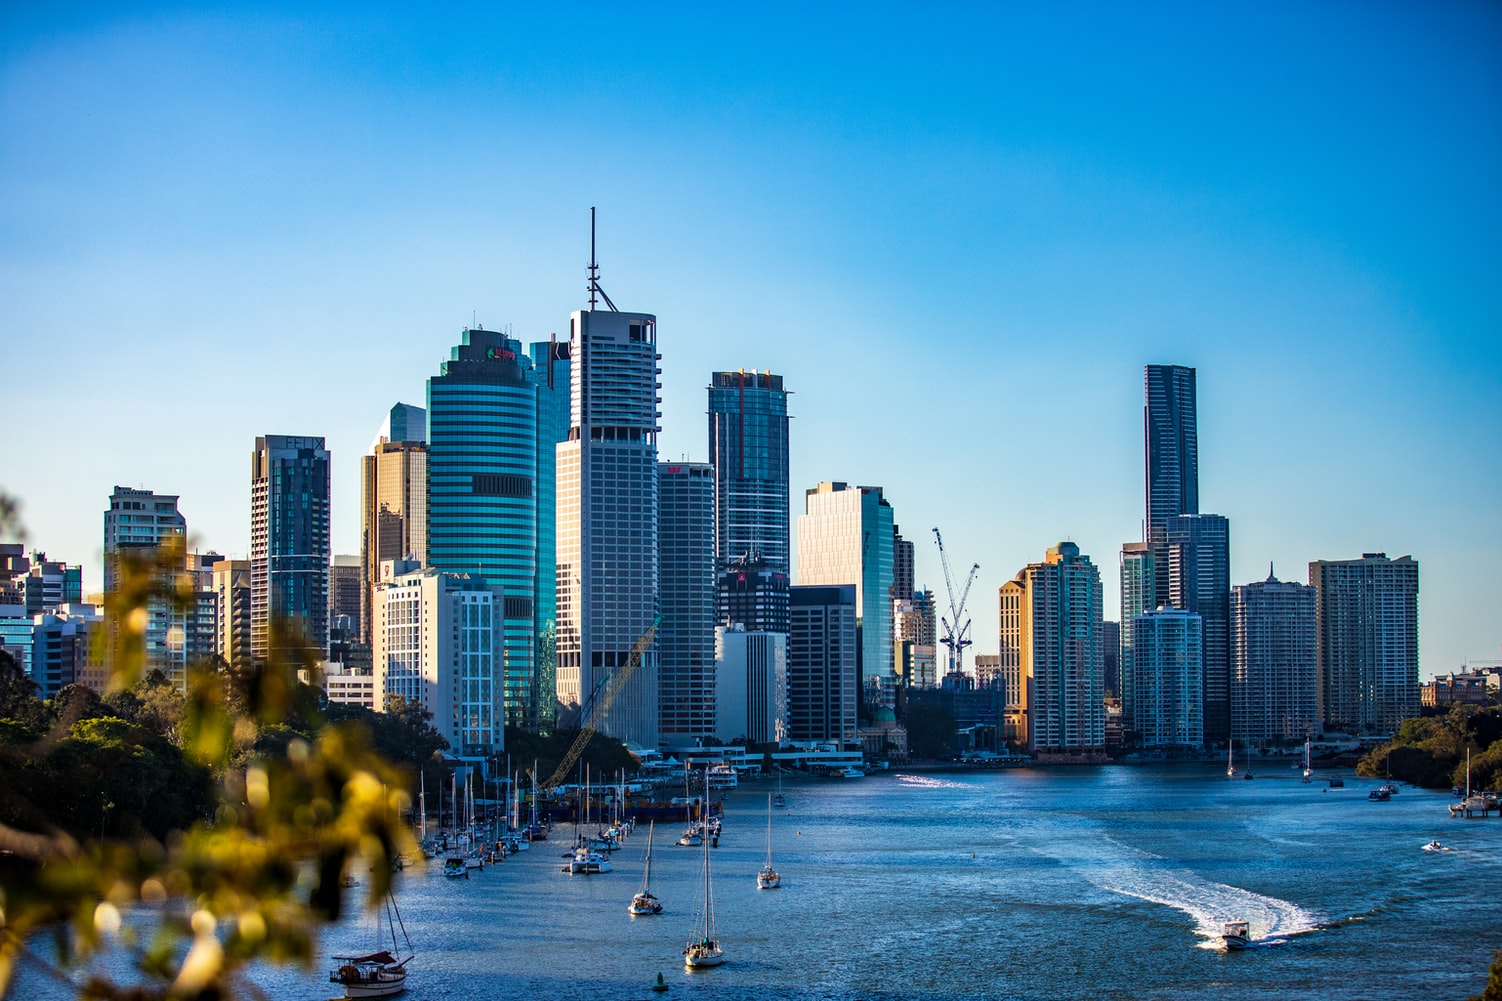 View of Brisbane CBD from the river